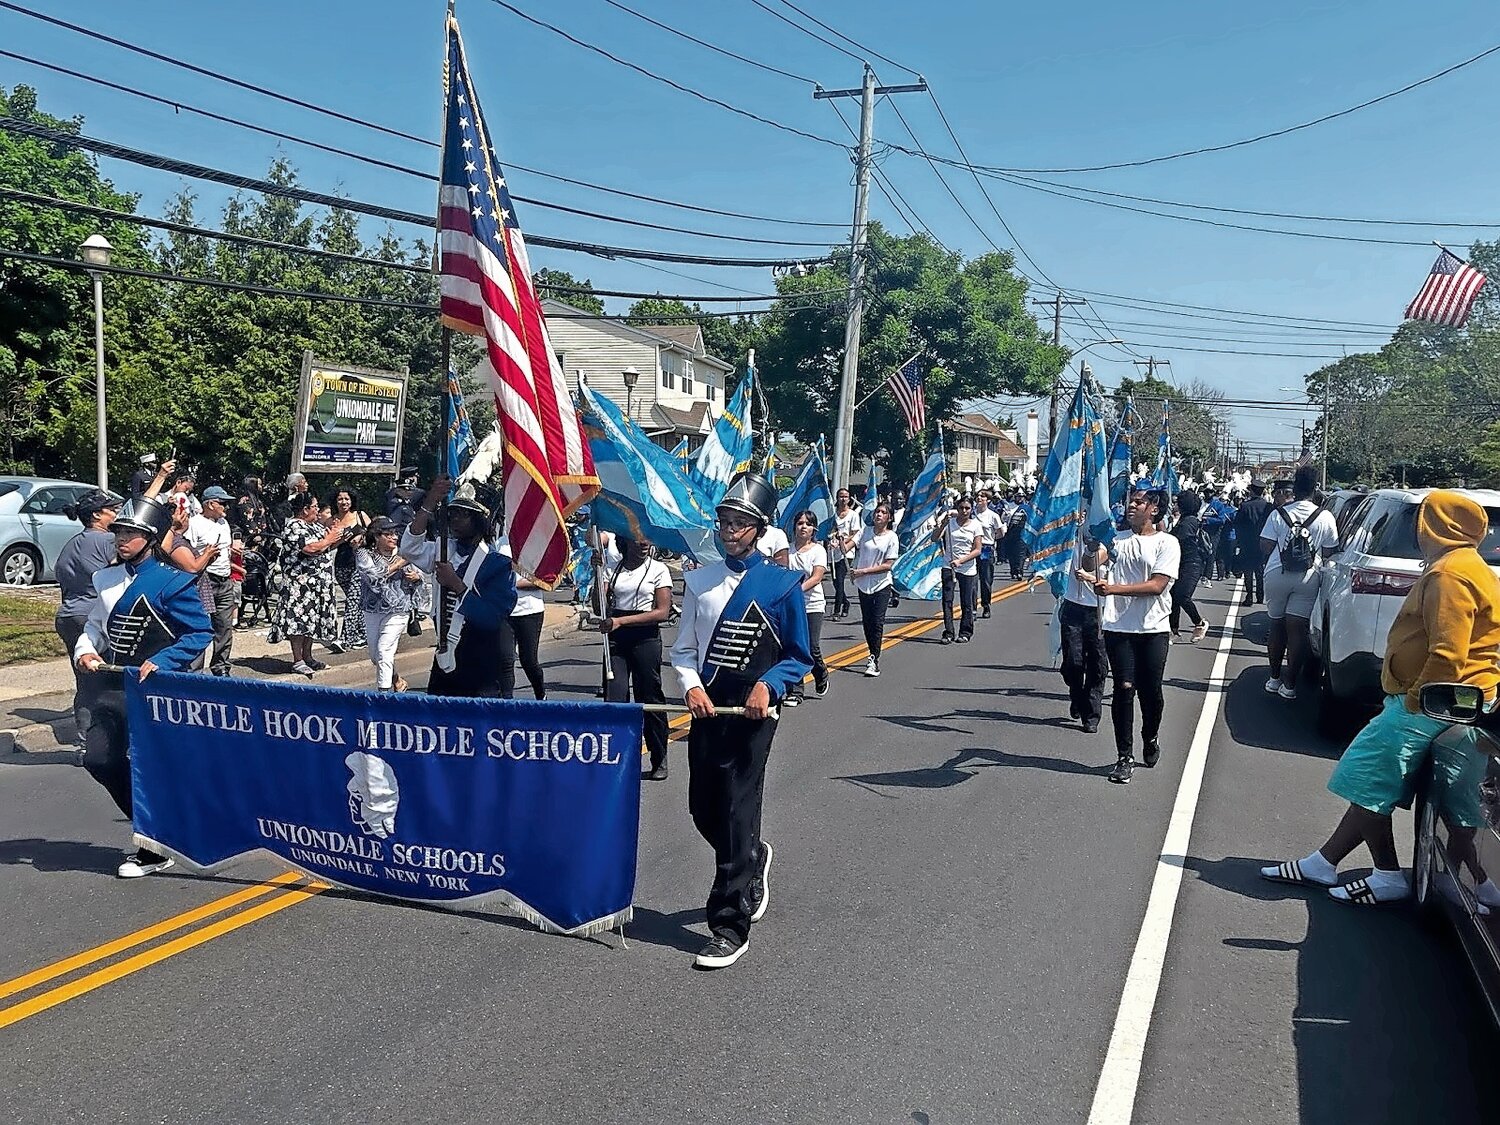 The Turtle Hook Middle School marching band moved along Uniondale Avenue.